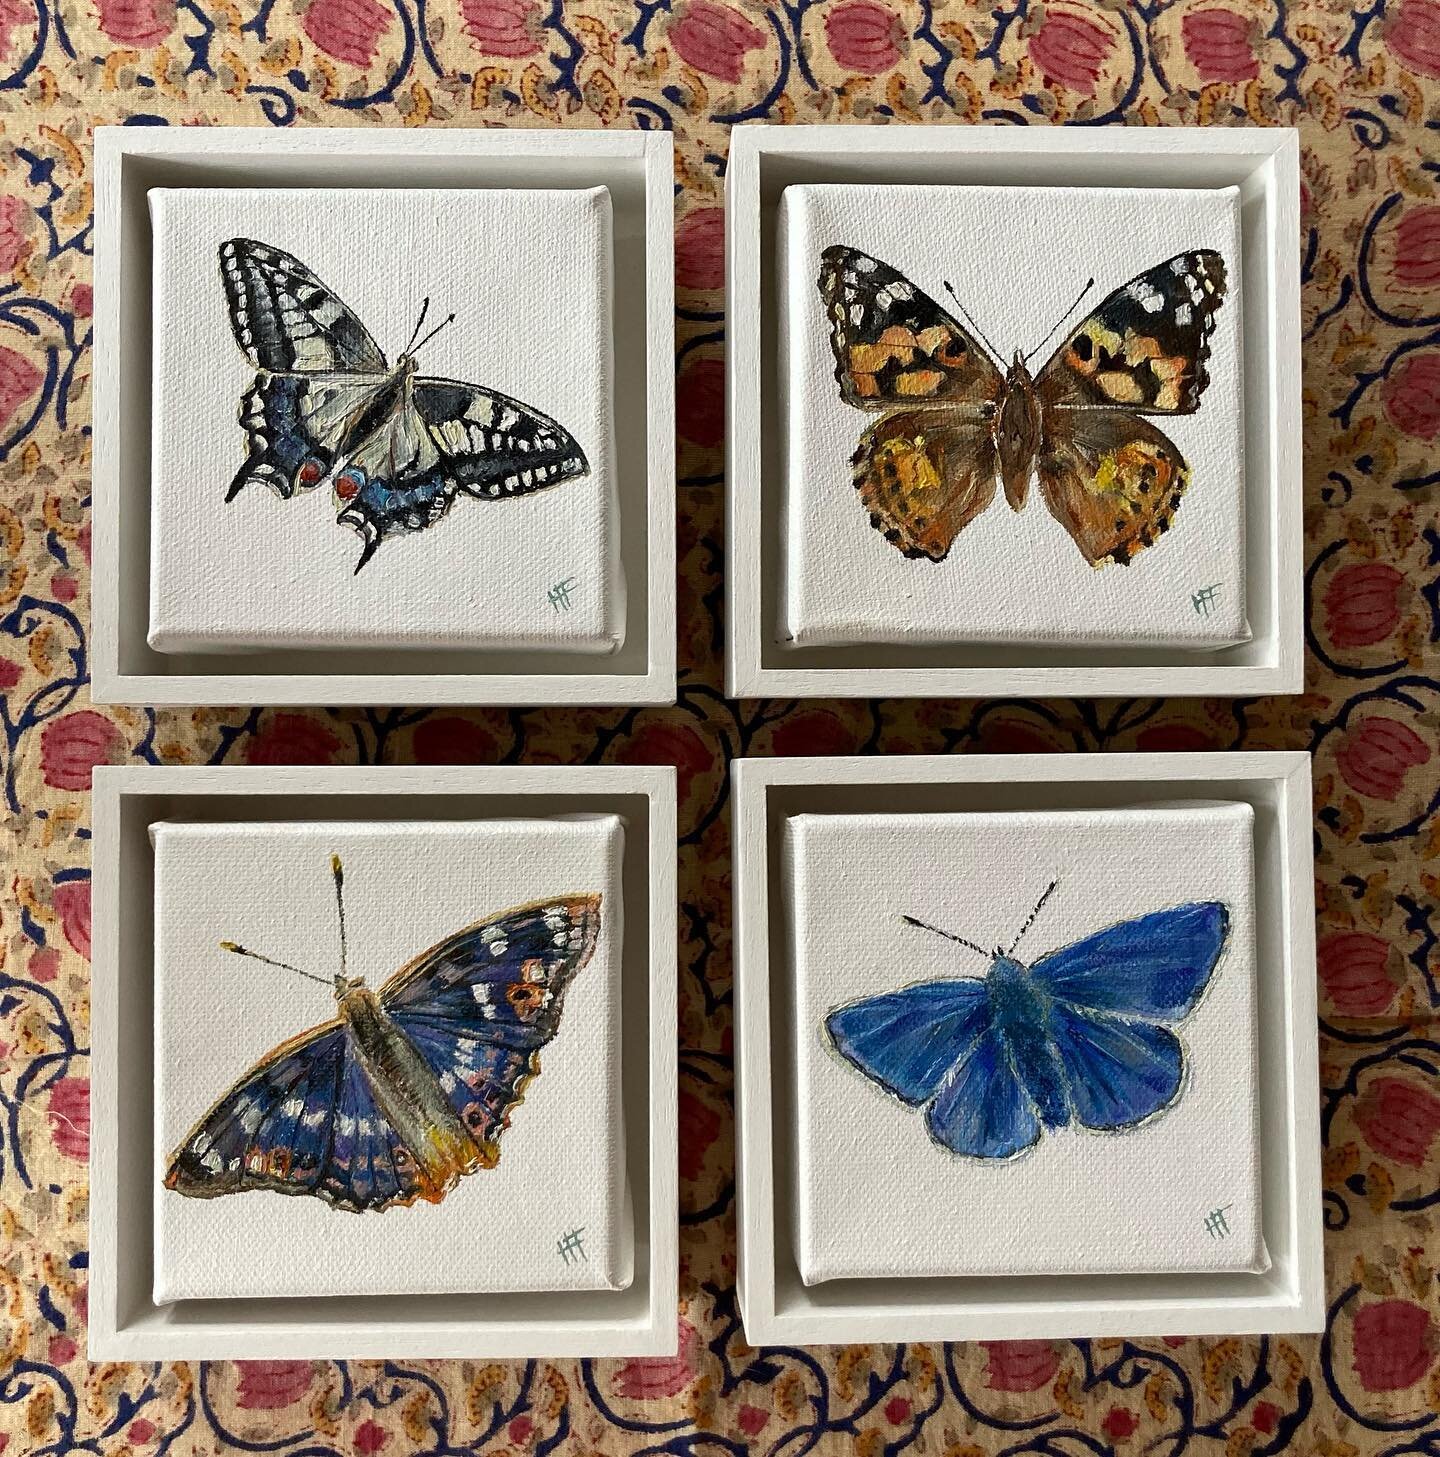 The wonder of the world, the beauty and the power, the shapes of things,
their colours, lights and shades; these I saw. Look ye also while life lasts&hellip; 

These British butterfly miniatures are back from @levertonframers and ready for their flig